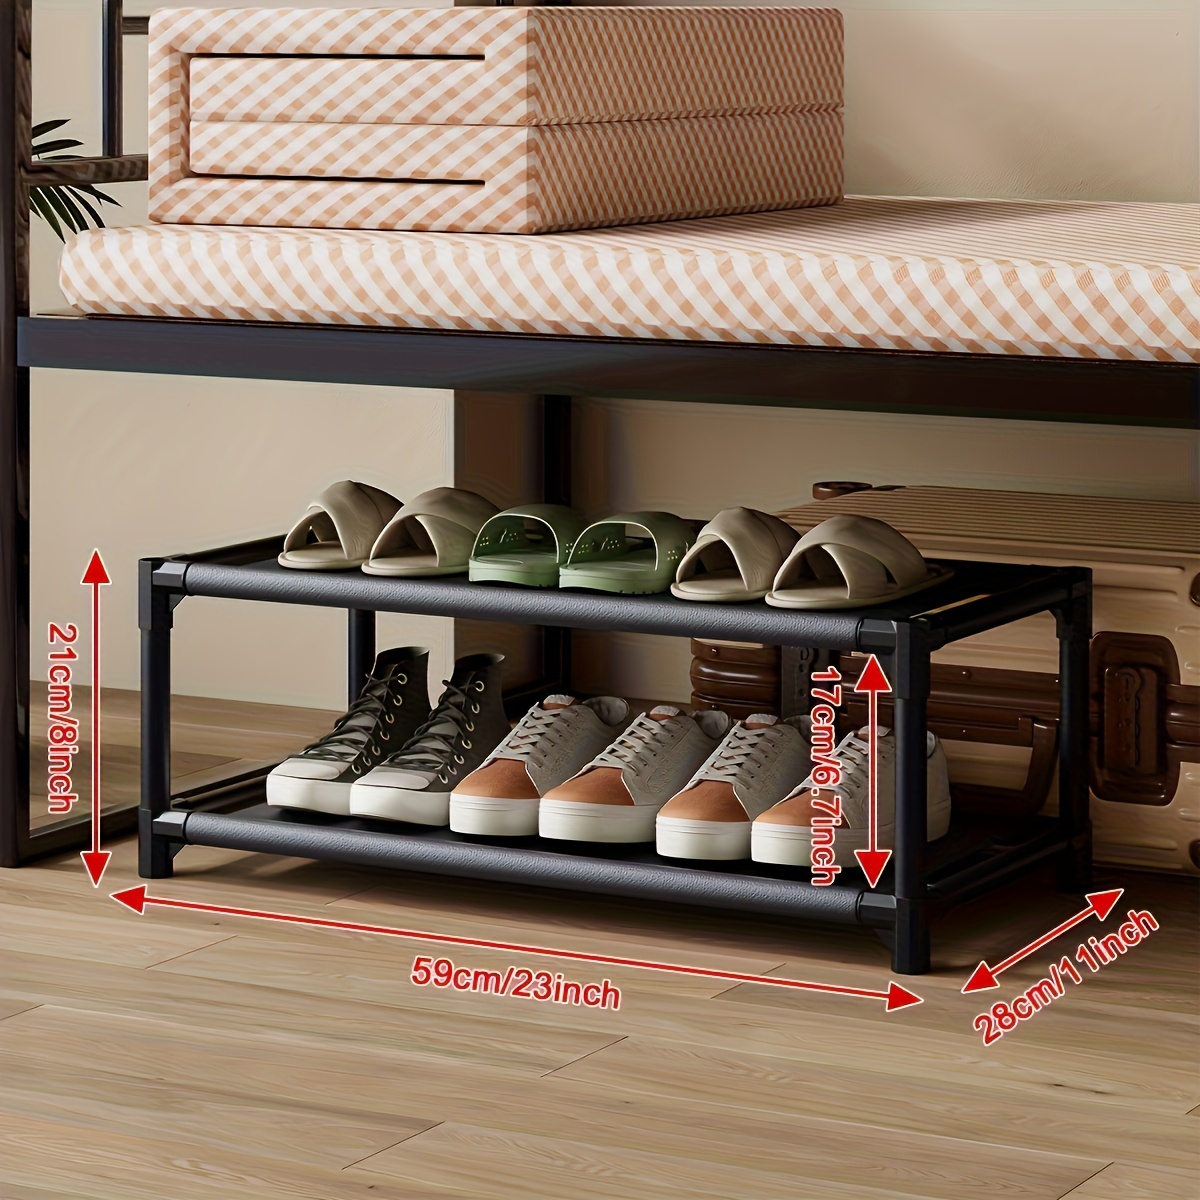 

1pc Shoe Metal Rack, Simple Multi-layer Easy Assembly Shoe Storage Shelf, Dust-proof Space-saving Shoe Storage Rack, Household Space Saving Storage Organizer For Bedroom, Doorway, Entryway, Home, Dorm